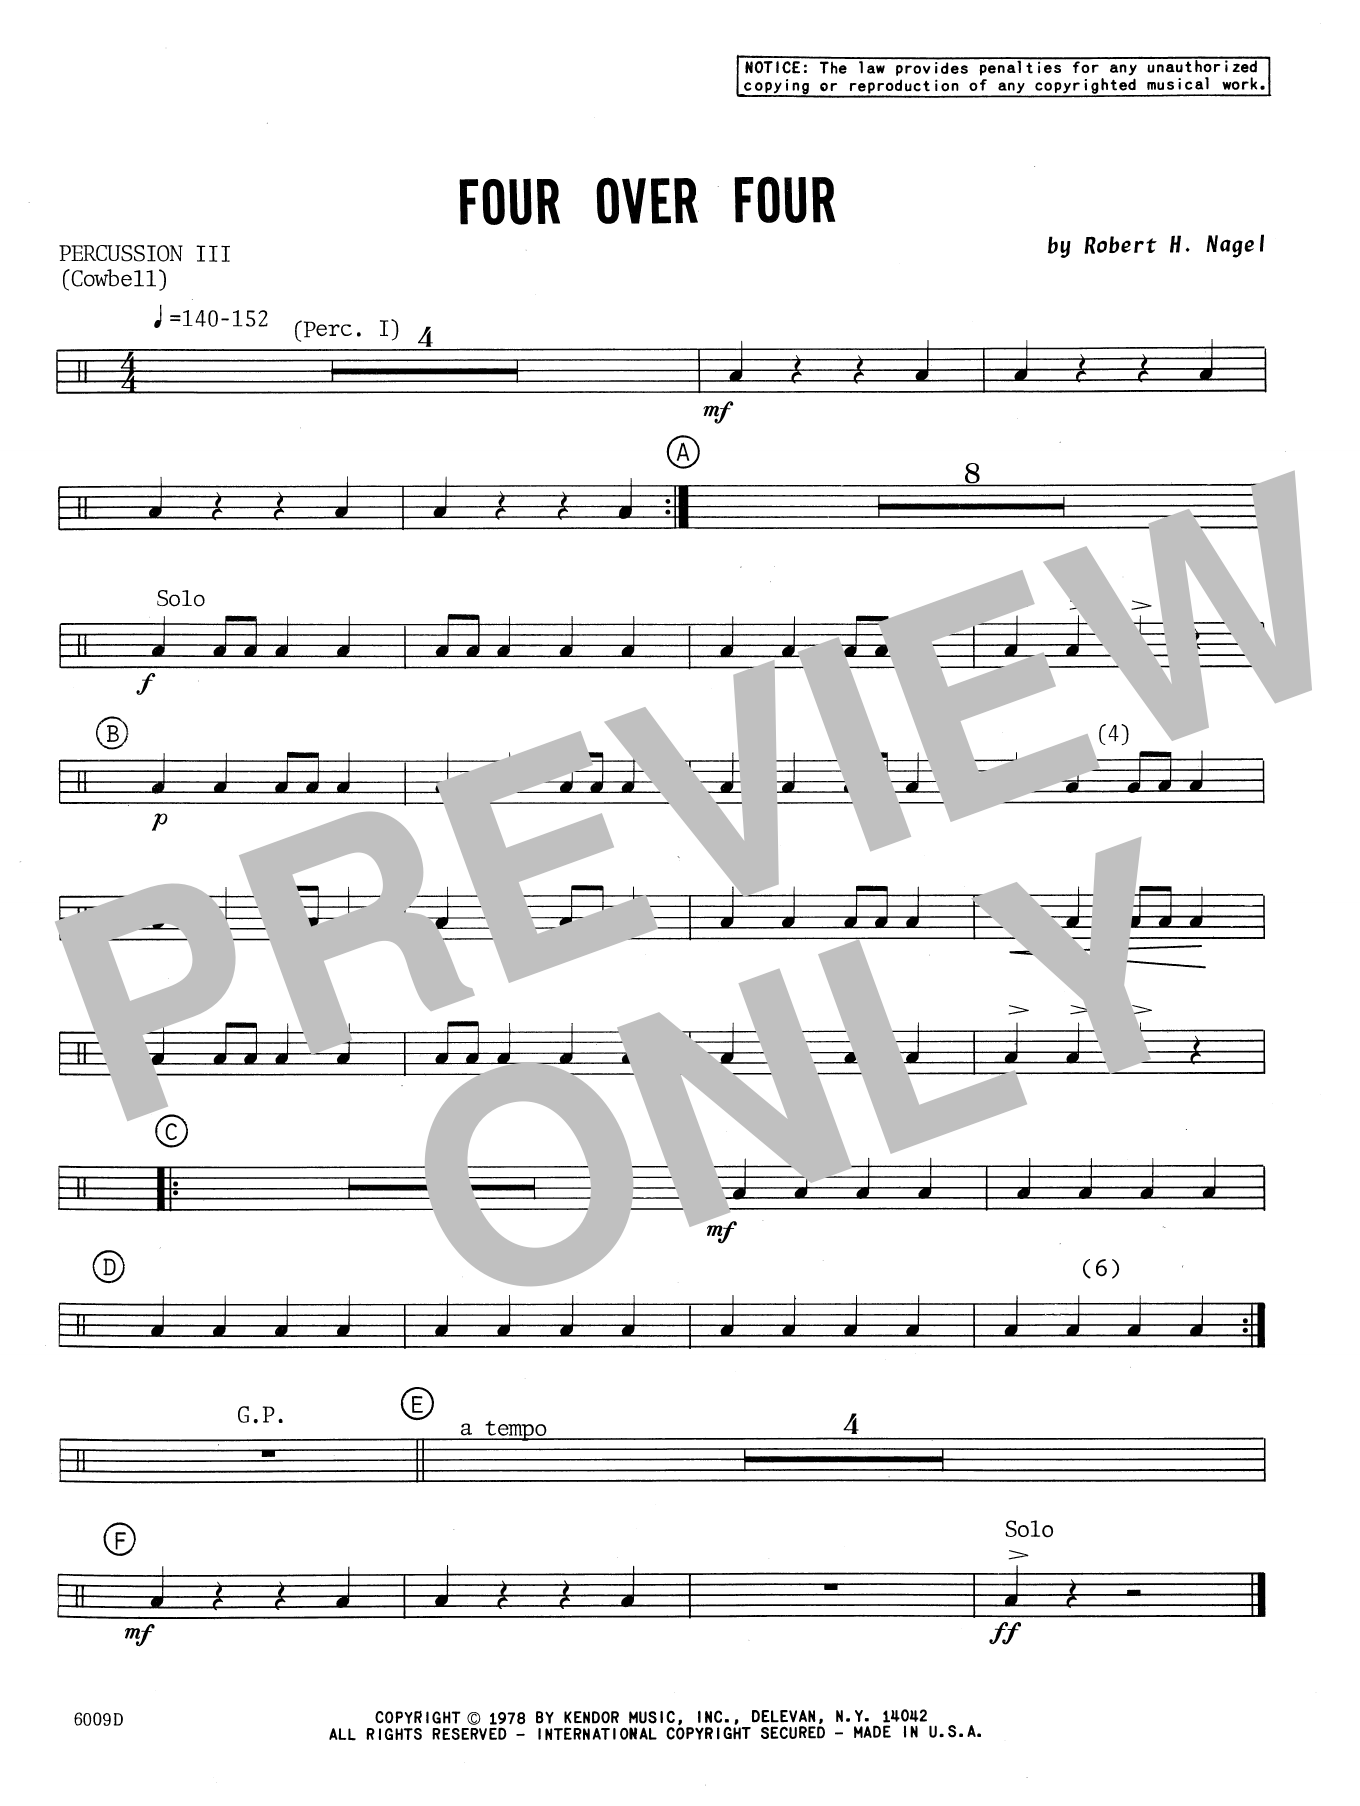 Download Robert H. Nagel Four Over Four - Percussion 3 Sheet Music